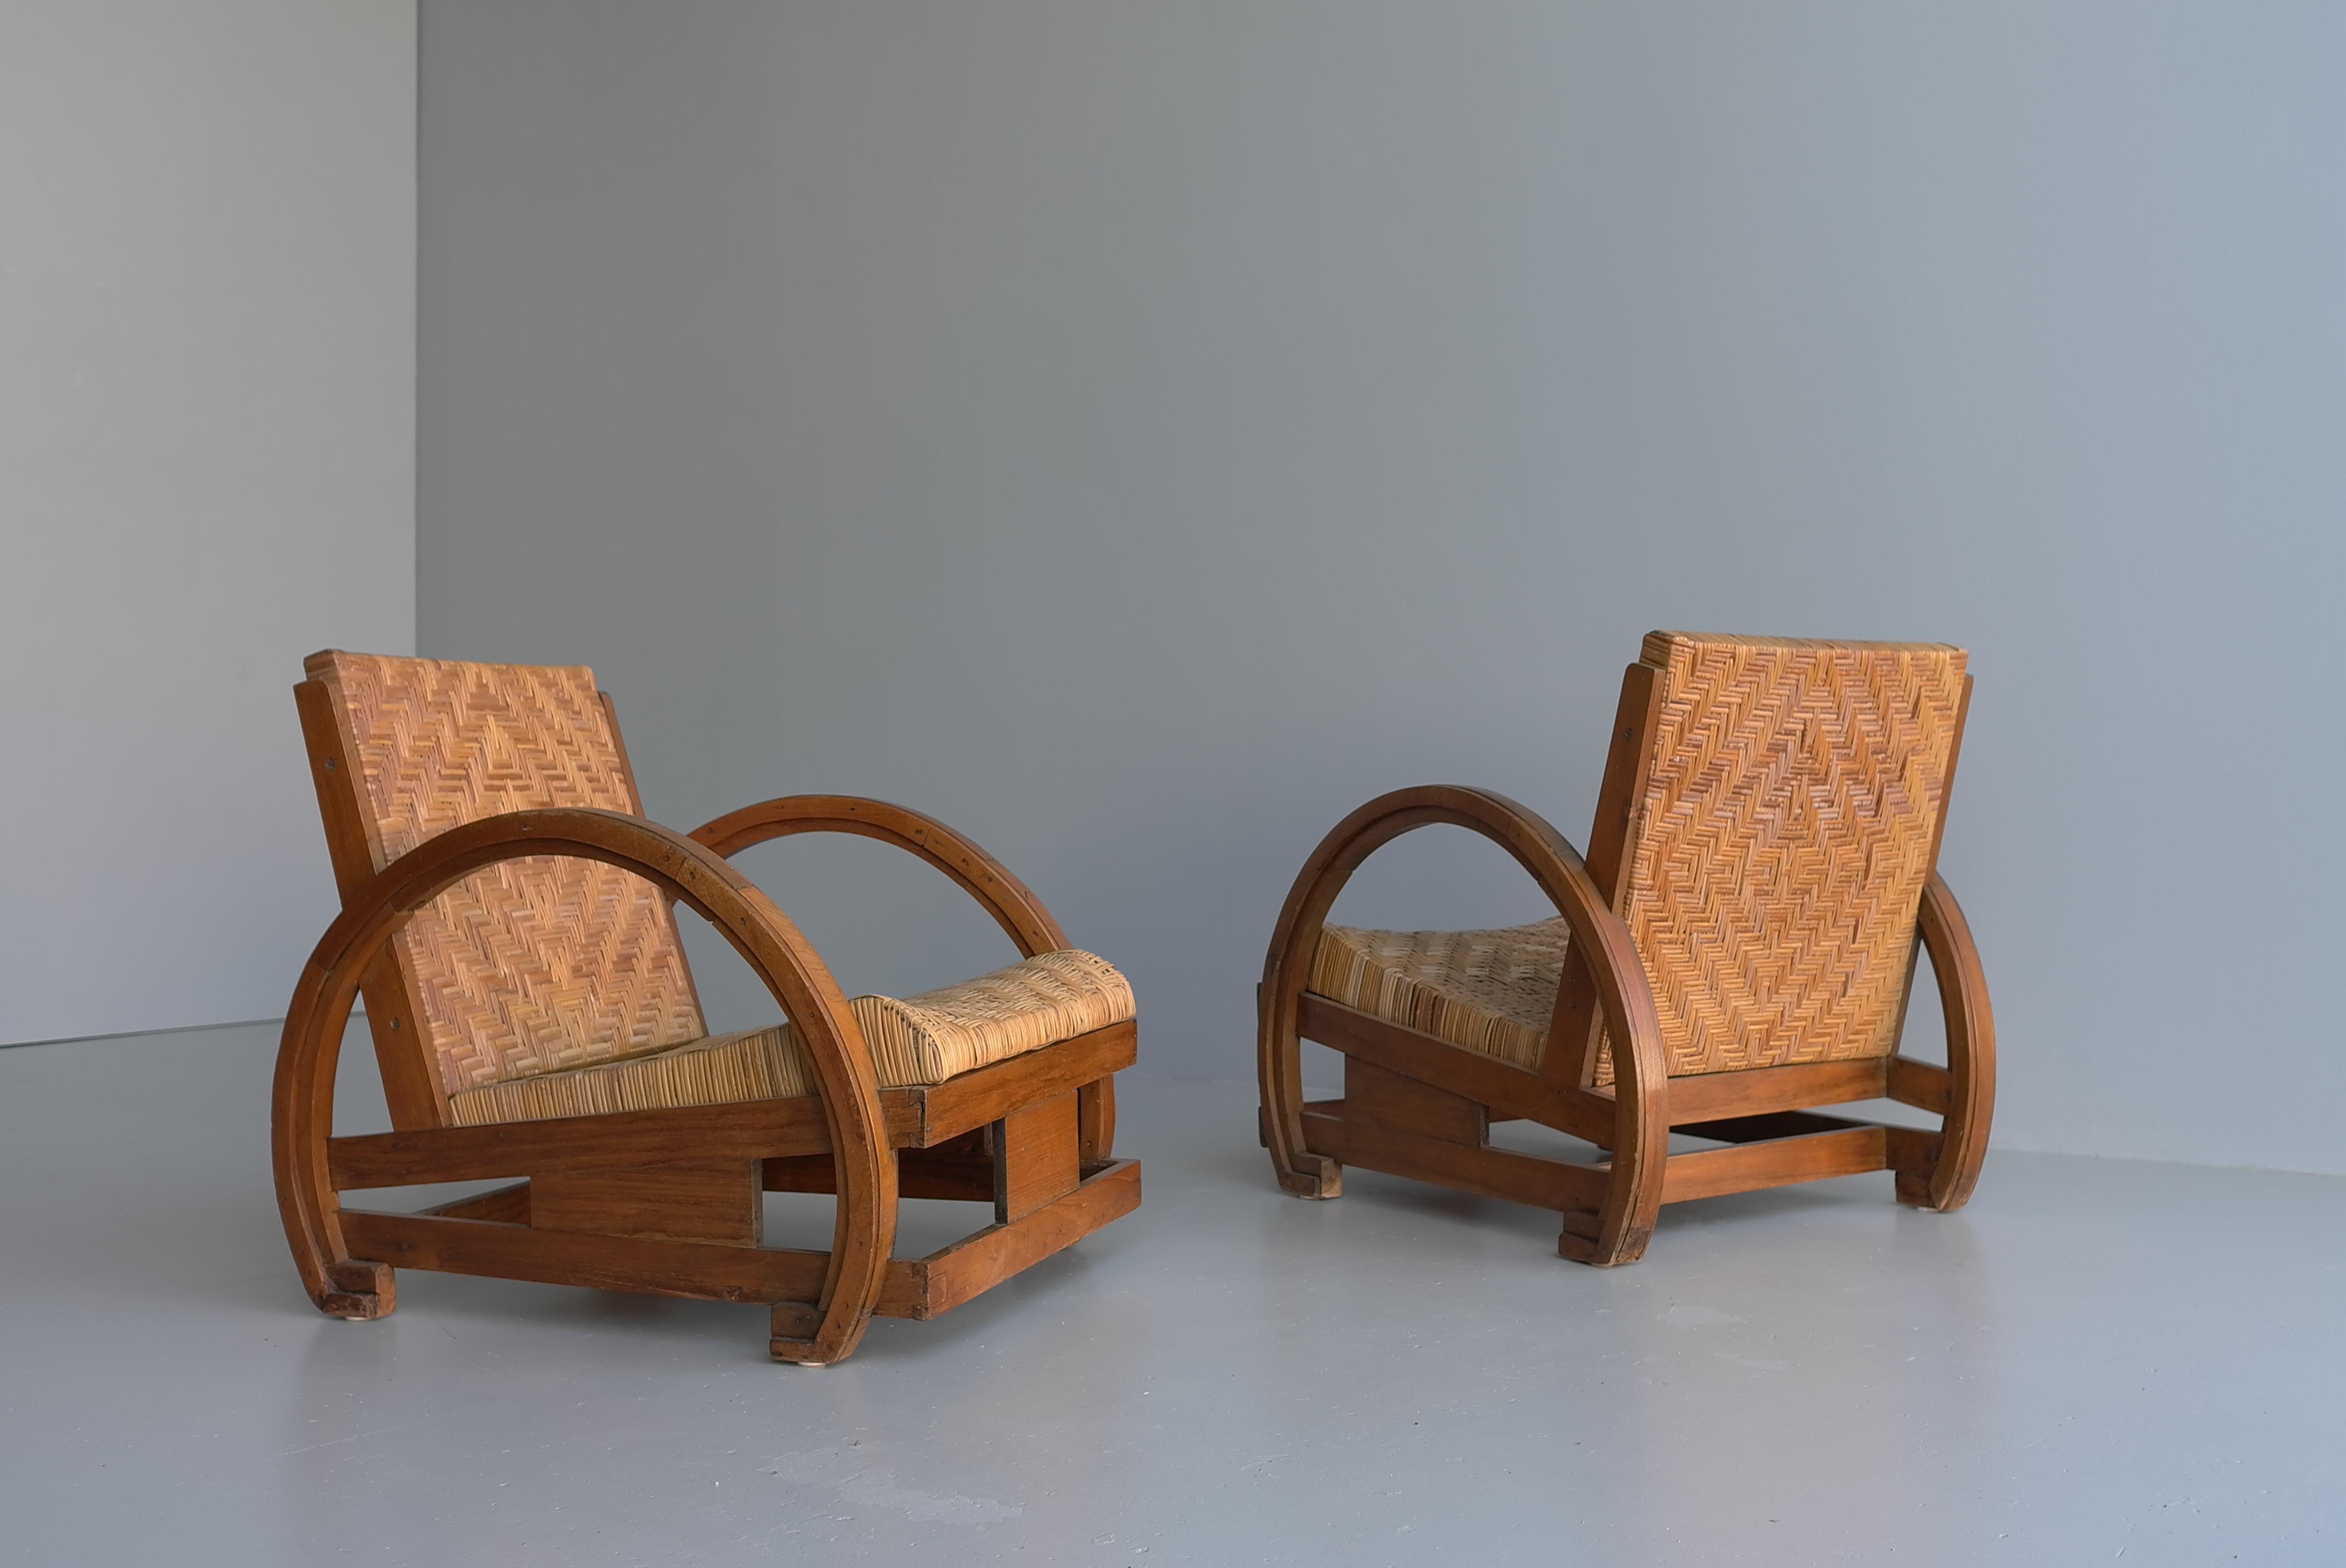 Pair Of Sculptural Art Deco Armchairs in Wood with Rush seats 1930's For Sale 4